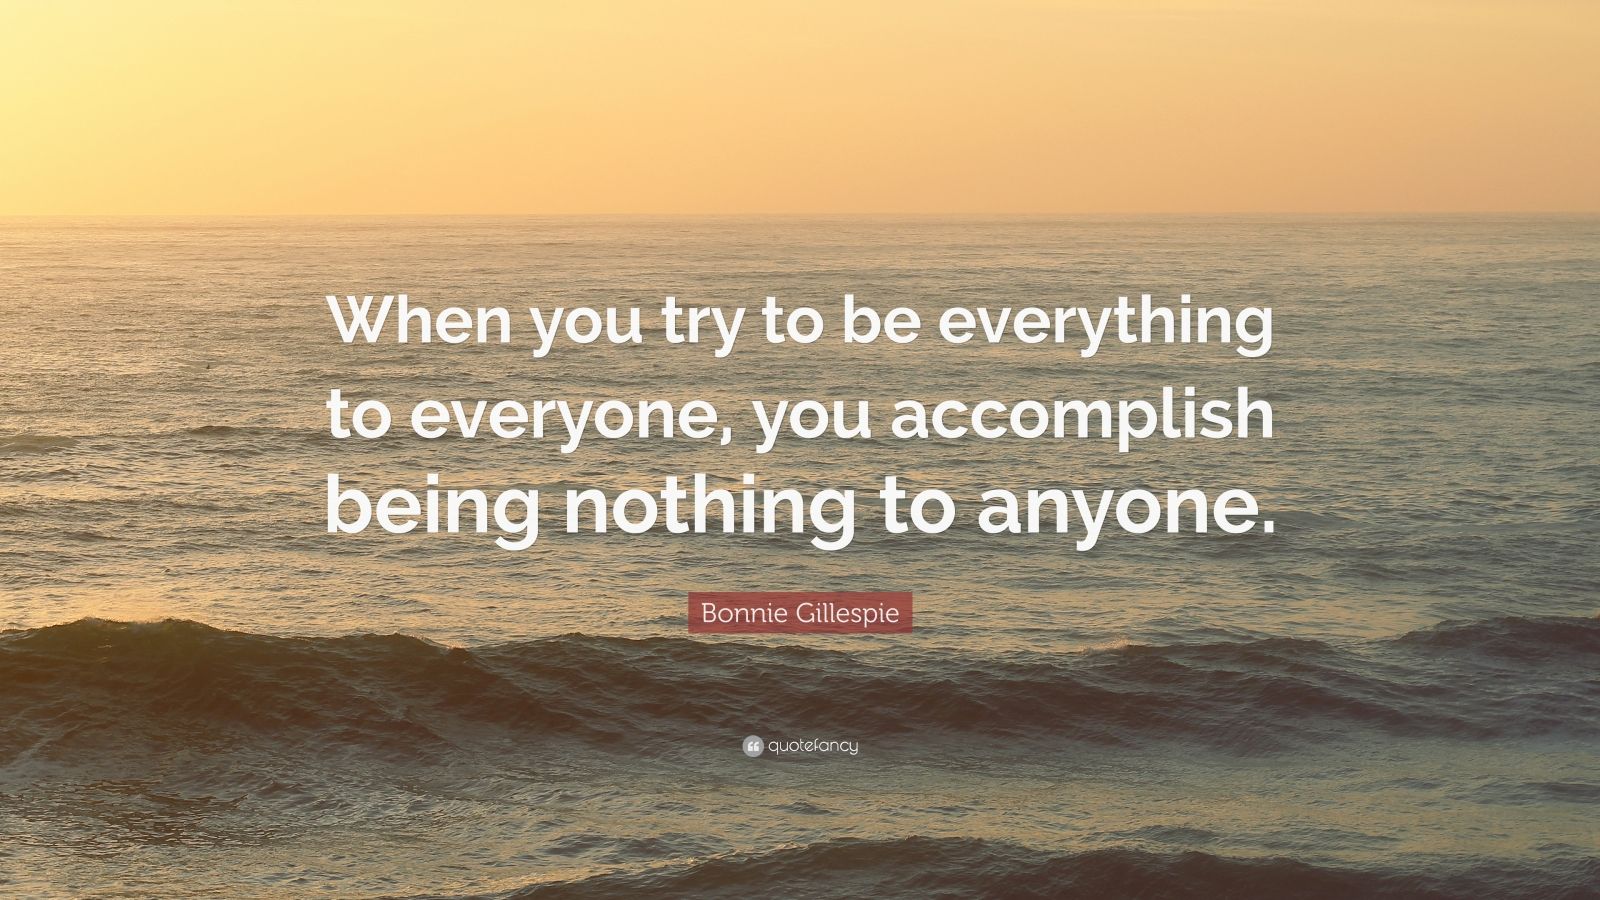 Bonnie Gillespie Quote: “When you try to be everything to everyone, you ...